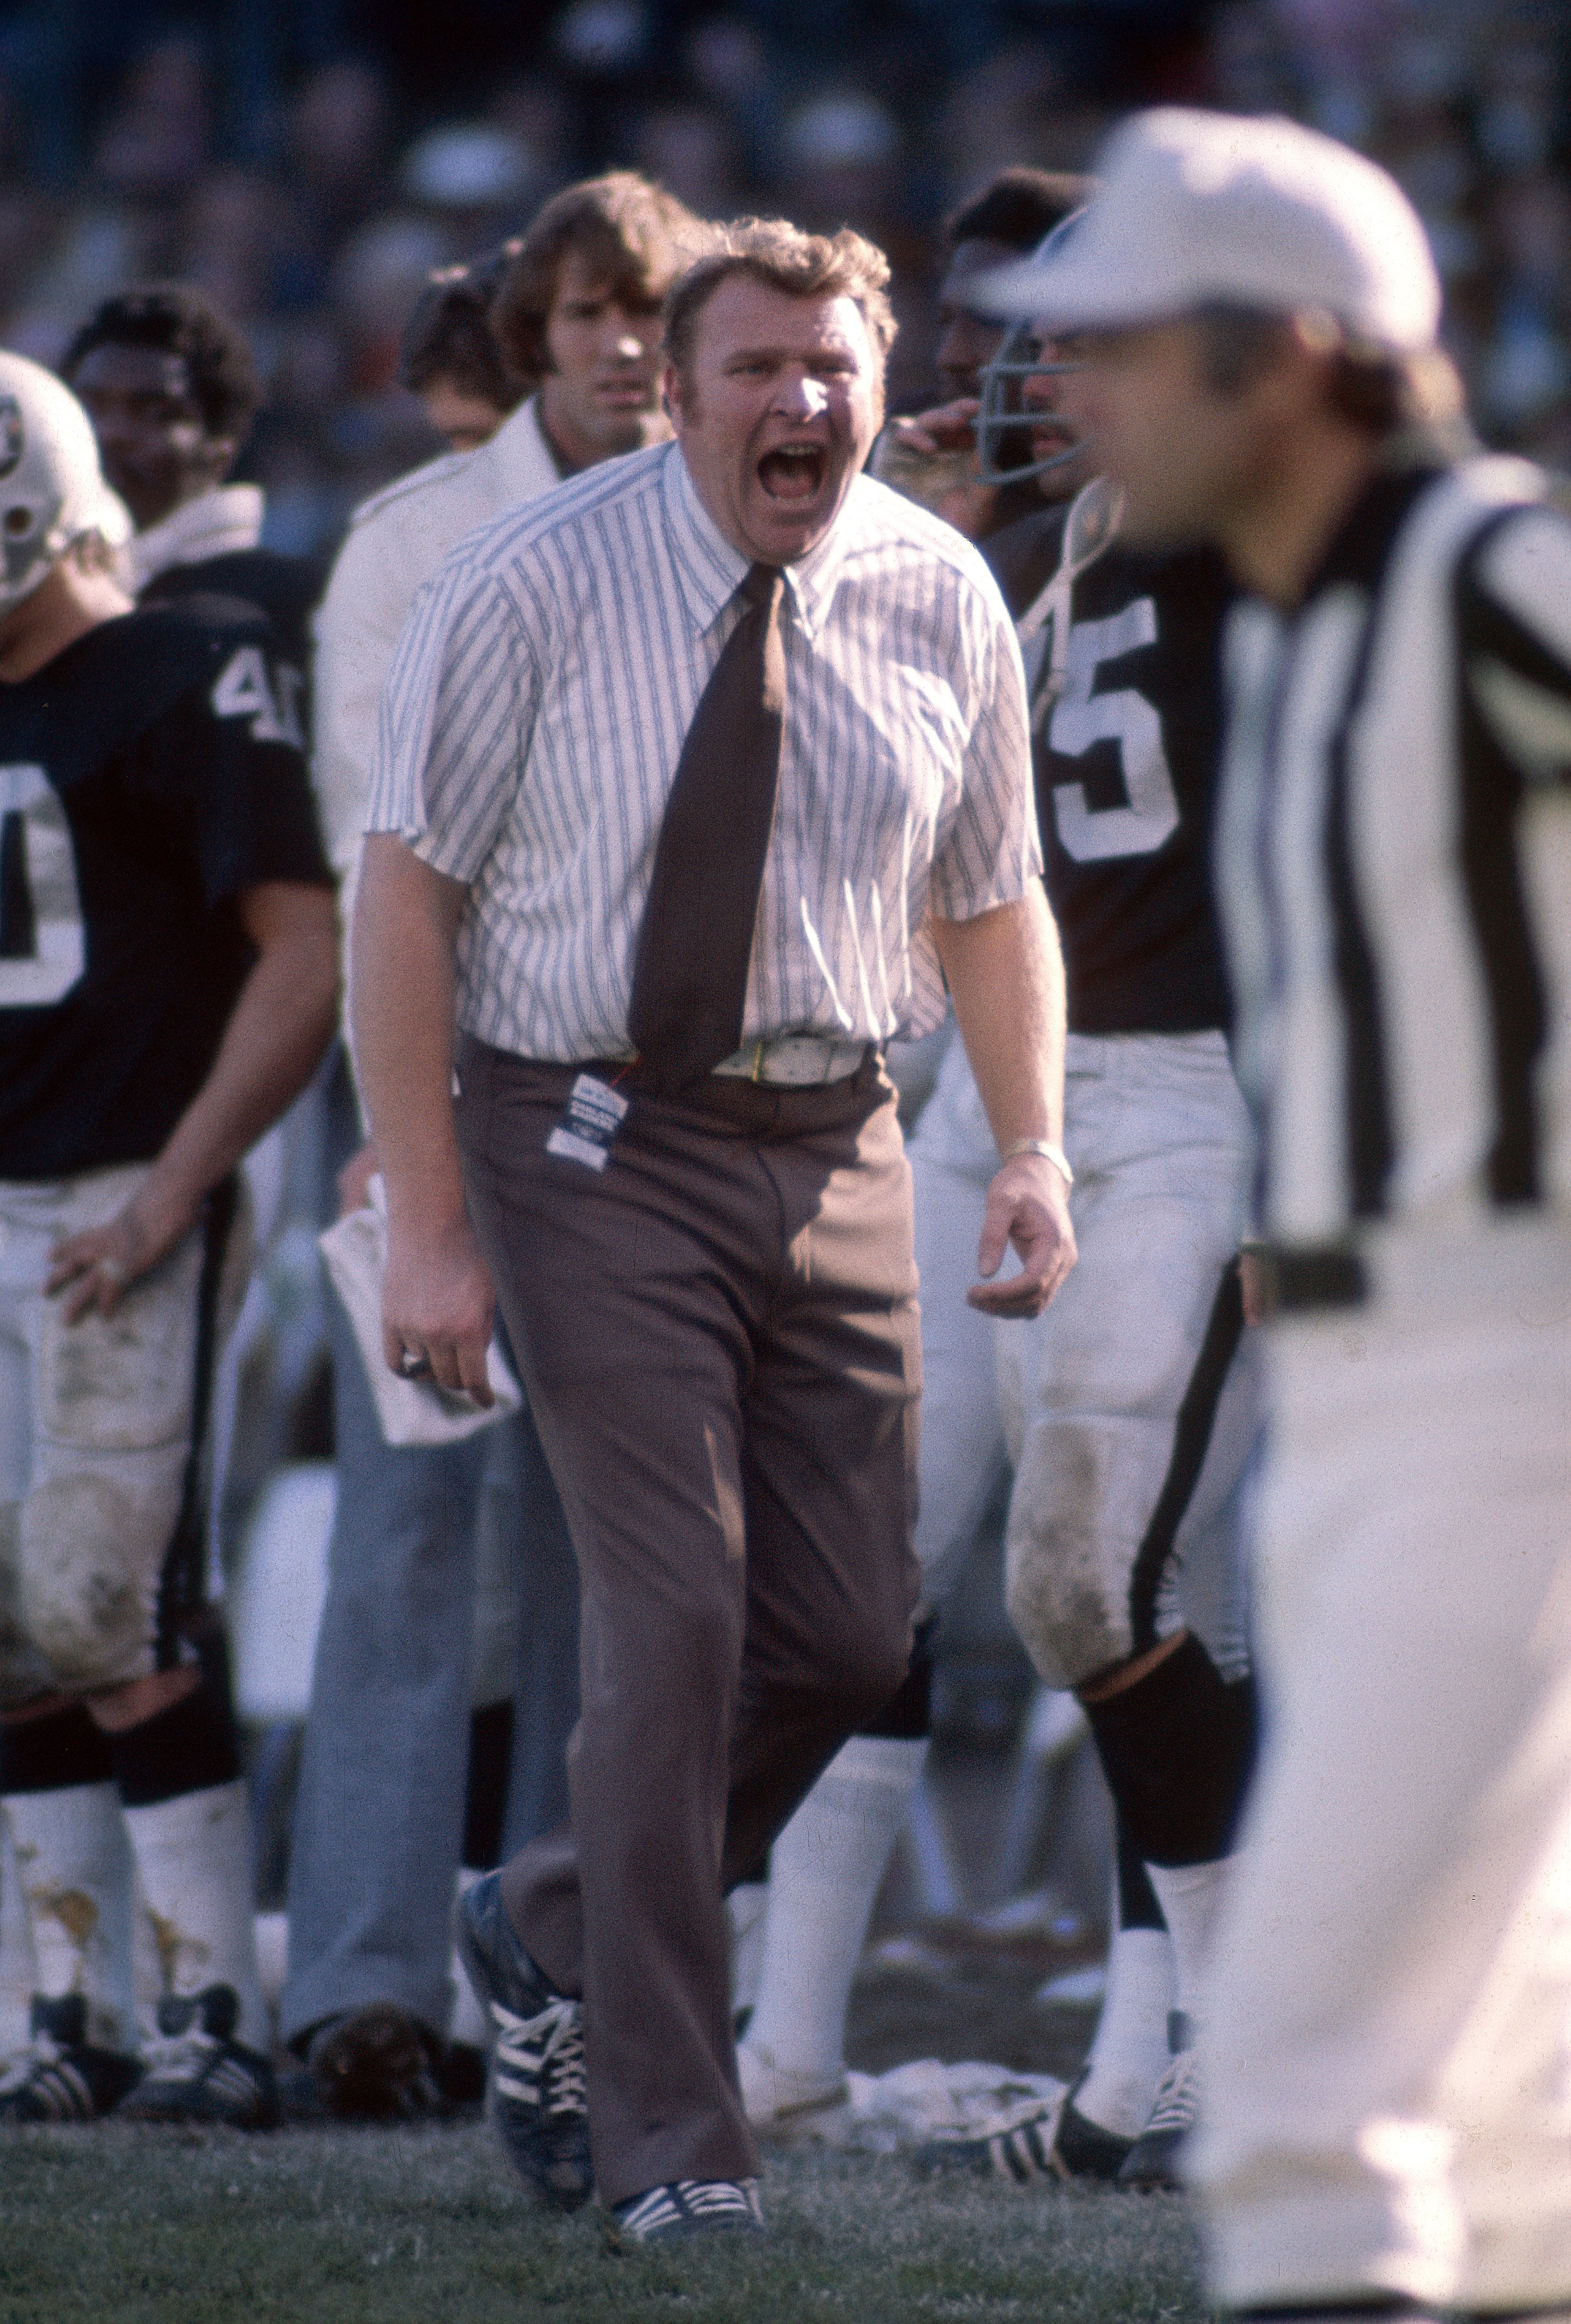 John Madden head coach of the Oakland Raiders shouts at the referee from the sideline during an NFL game at the Oakland Coliseum in 1970s, in Oakland, California.| Source: Getty Images